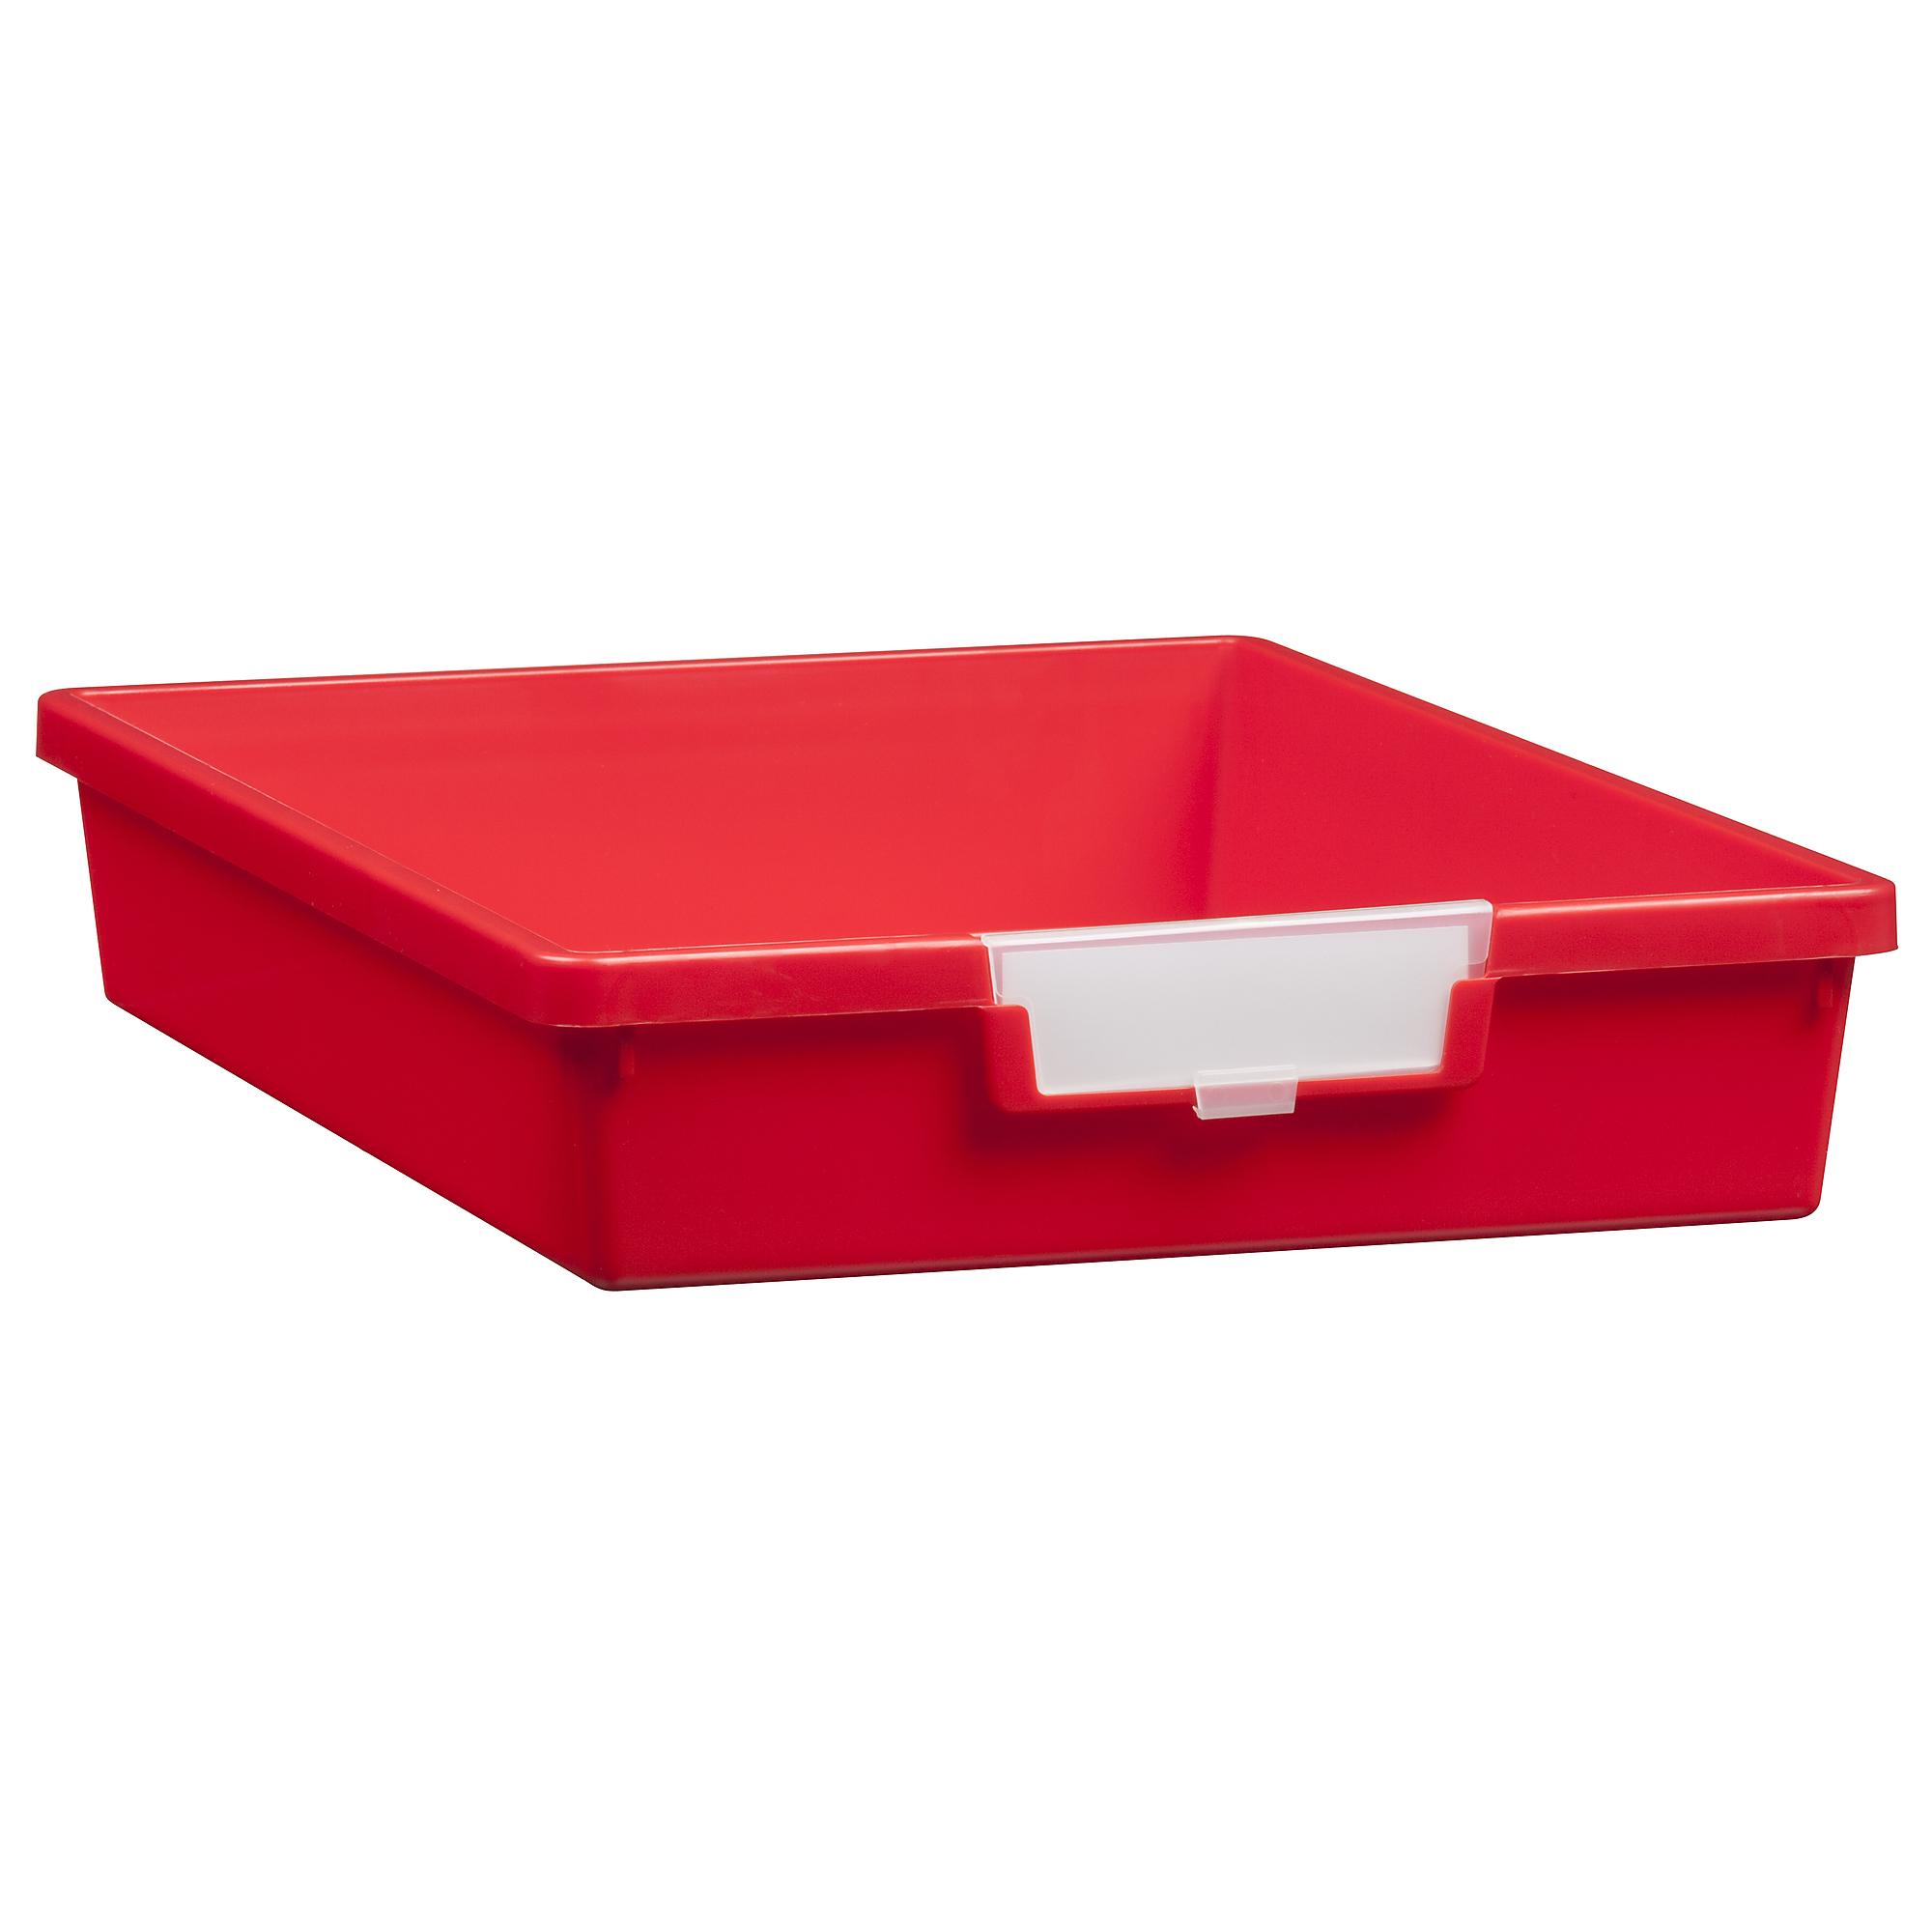 Certwood StorWerks, Slim Line 3Inch Tray in Primary Red-1PK, Included (qty.) 1 Height 3 in, Model CE1950PR1